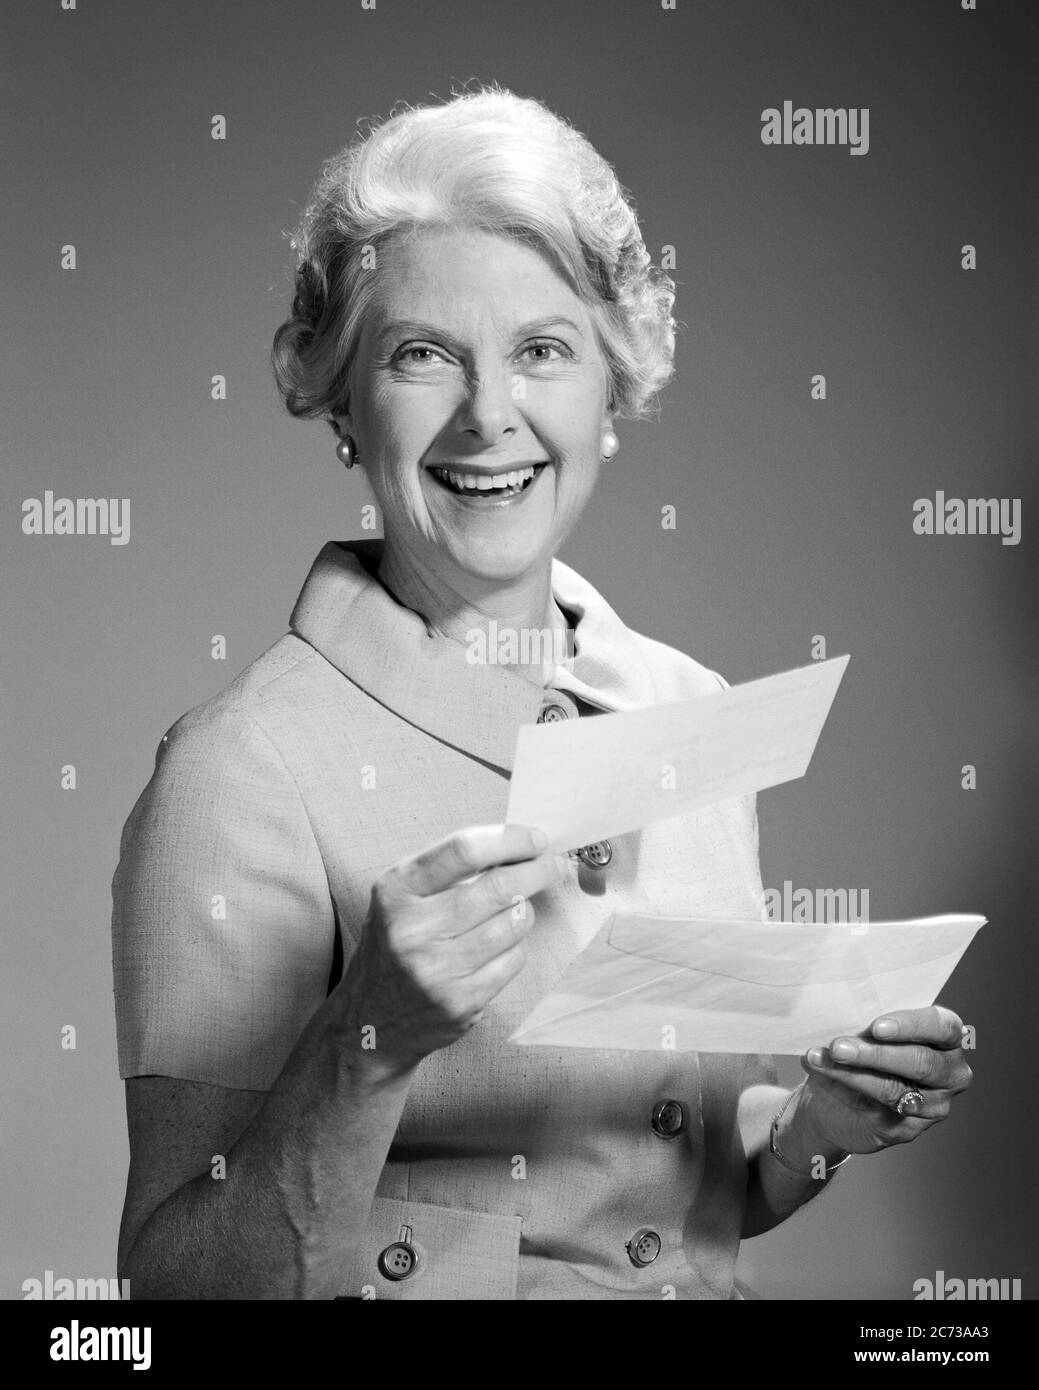 1960s SMILING SENIOR WOMAN LOOKING AT CAMERA HOLDING PAYMENT CHECK AND ENVELOPE RECEIVED IN THE MAIL - s16899 HAR001 HARS ELDER FEMALES STUDIO SHOT HOME LIFE COPY SPACE HALF-LENGTH LADIES PERSONS RETIREMENT SENIOR ADULT EXPRESSIONS B&W EYE CONTACT SENIOR WOMAN FREEDOM SUCCESS RETIREE HAPPINESS OLD AGE OLDSTERS CHEERFUL OLDSTER PROTECTION STRATEGY AND EXCITEMENT IN THE PAYMENT SMILES ELDERS CONCEPTUAL JOYFUL STYLISH RECEIVED SOCIAL SECURITY BLACK AND WHITE CAUCASIAN ETHNICITY HAR001 OLD FASHIONED Stock Photo